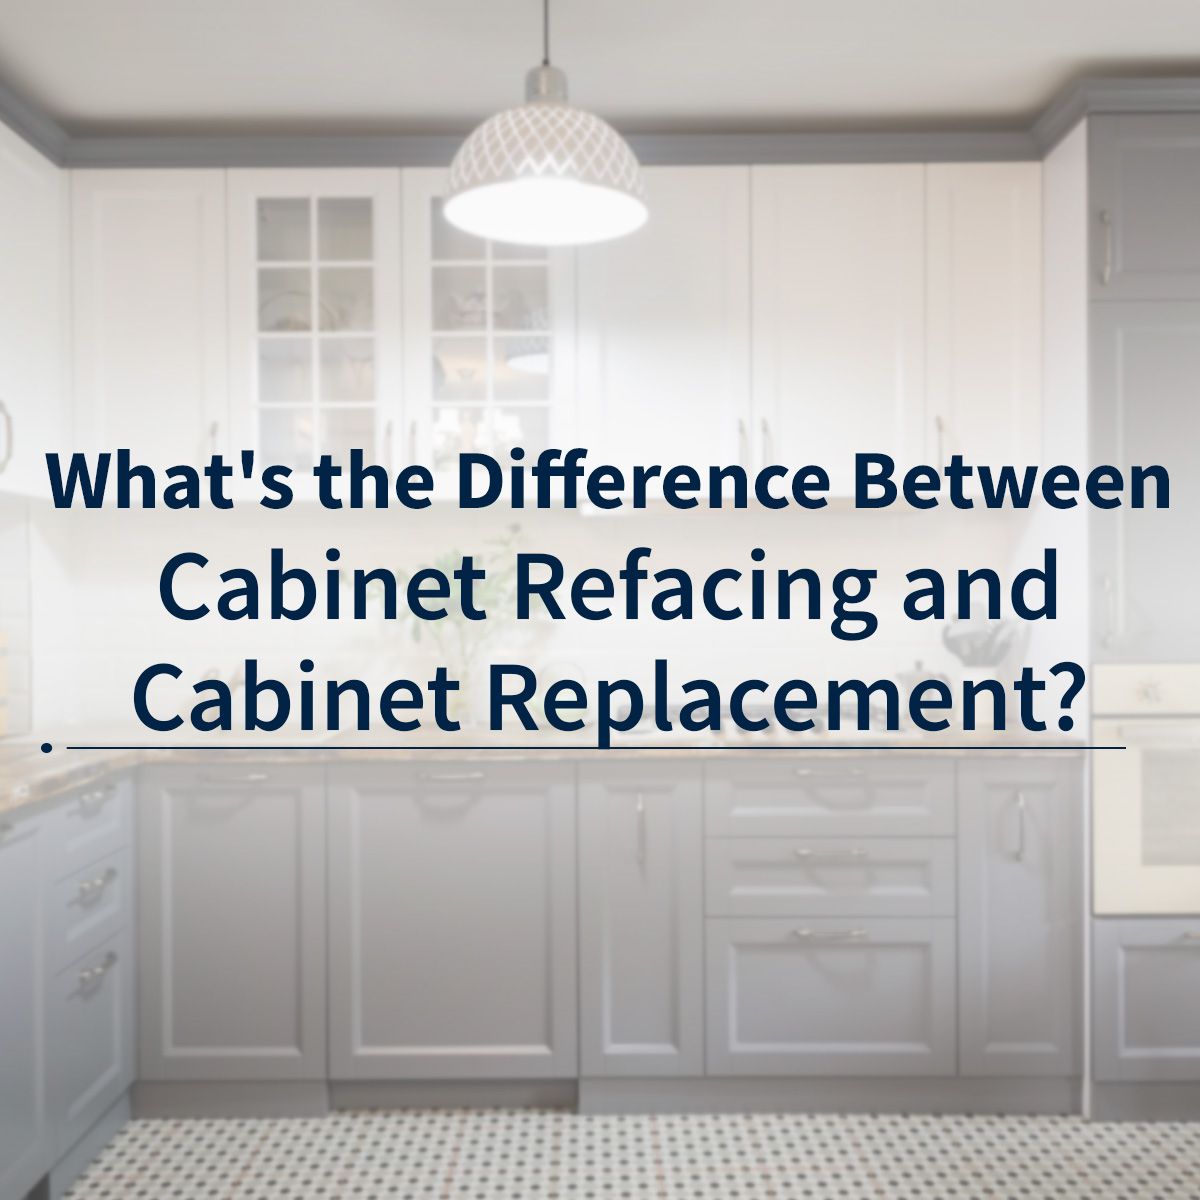 What's the Difference Between Cabinet Refacing and Cabinet Replacement?